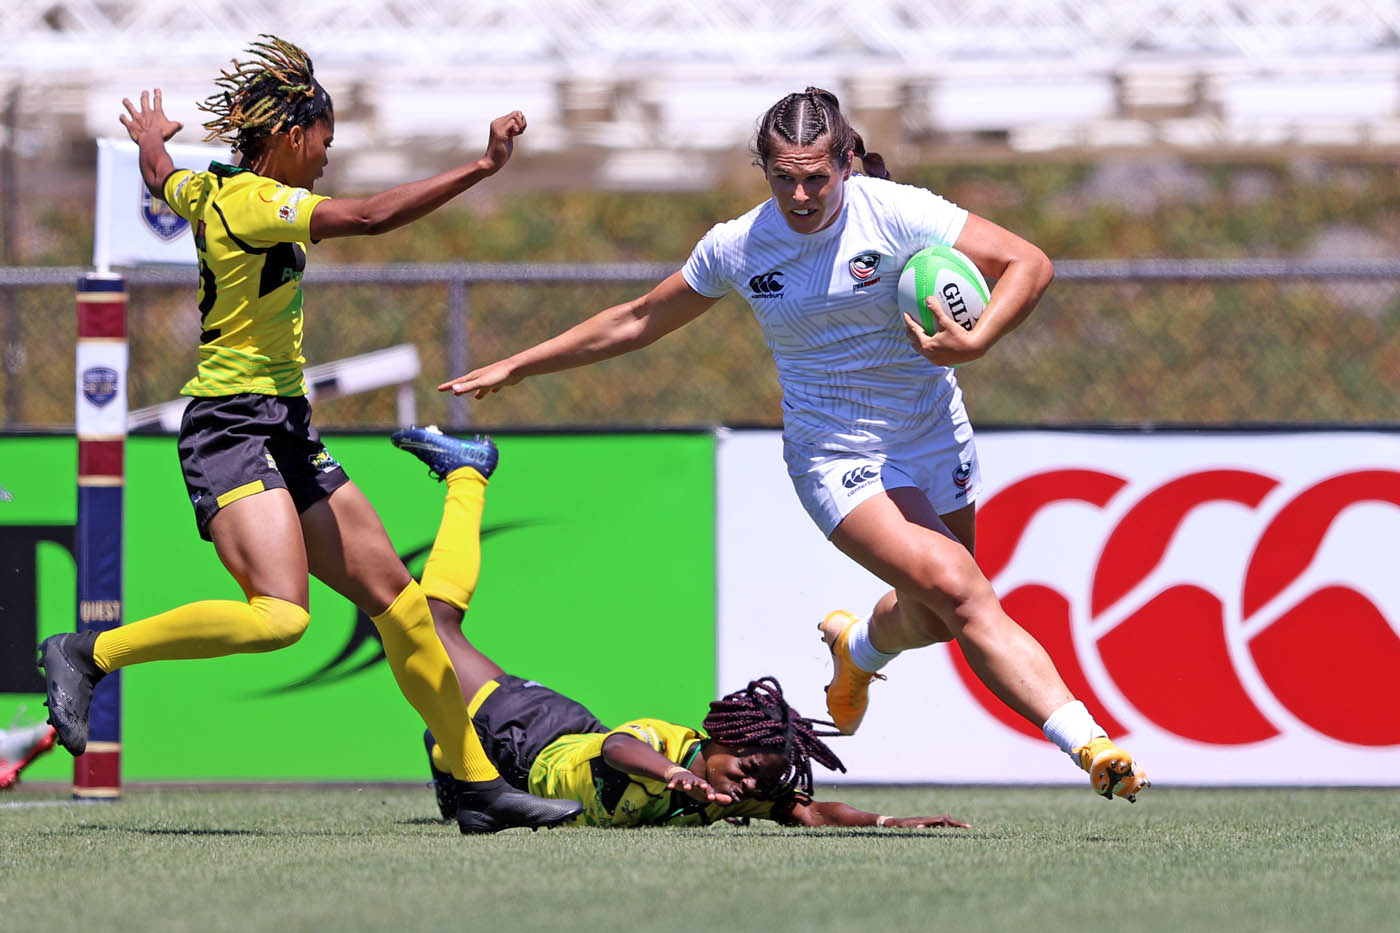 From Chula Vista to Tokyo — rugby sevens teams to compete for pride, gold The Star News